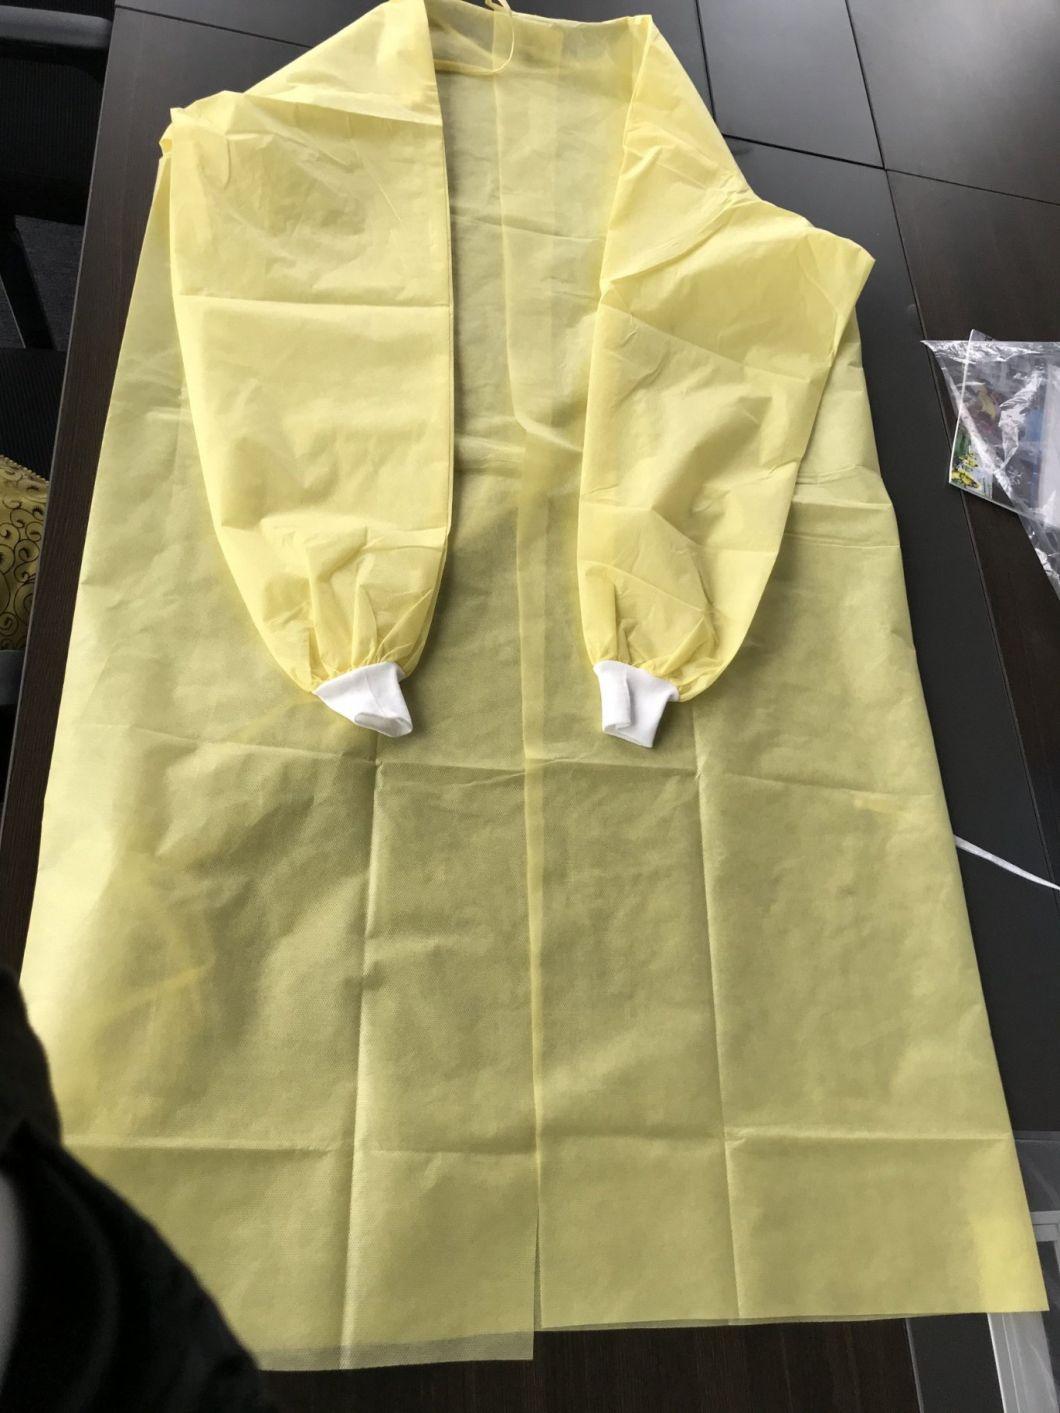 Waterproof Biological Disposable Pet Clothing Suit Protective Medical Isolation Gown